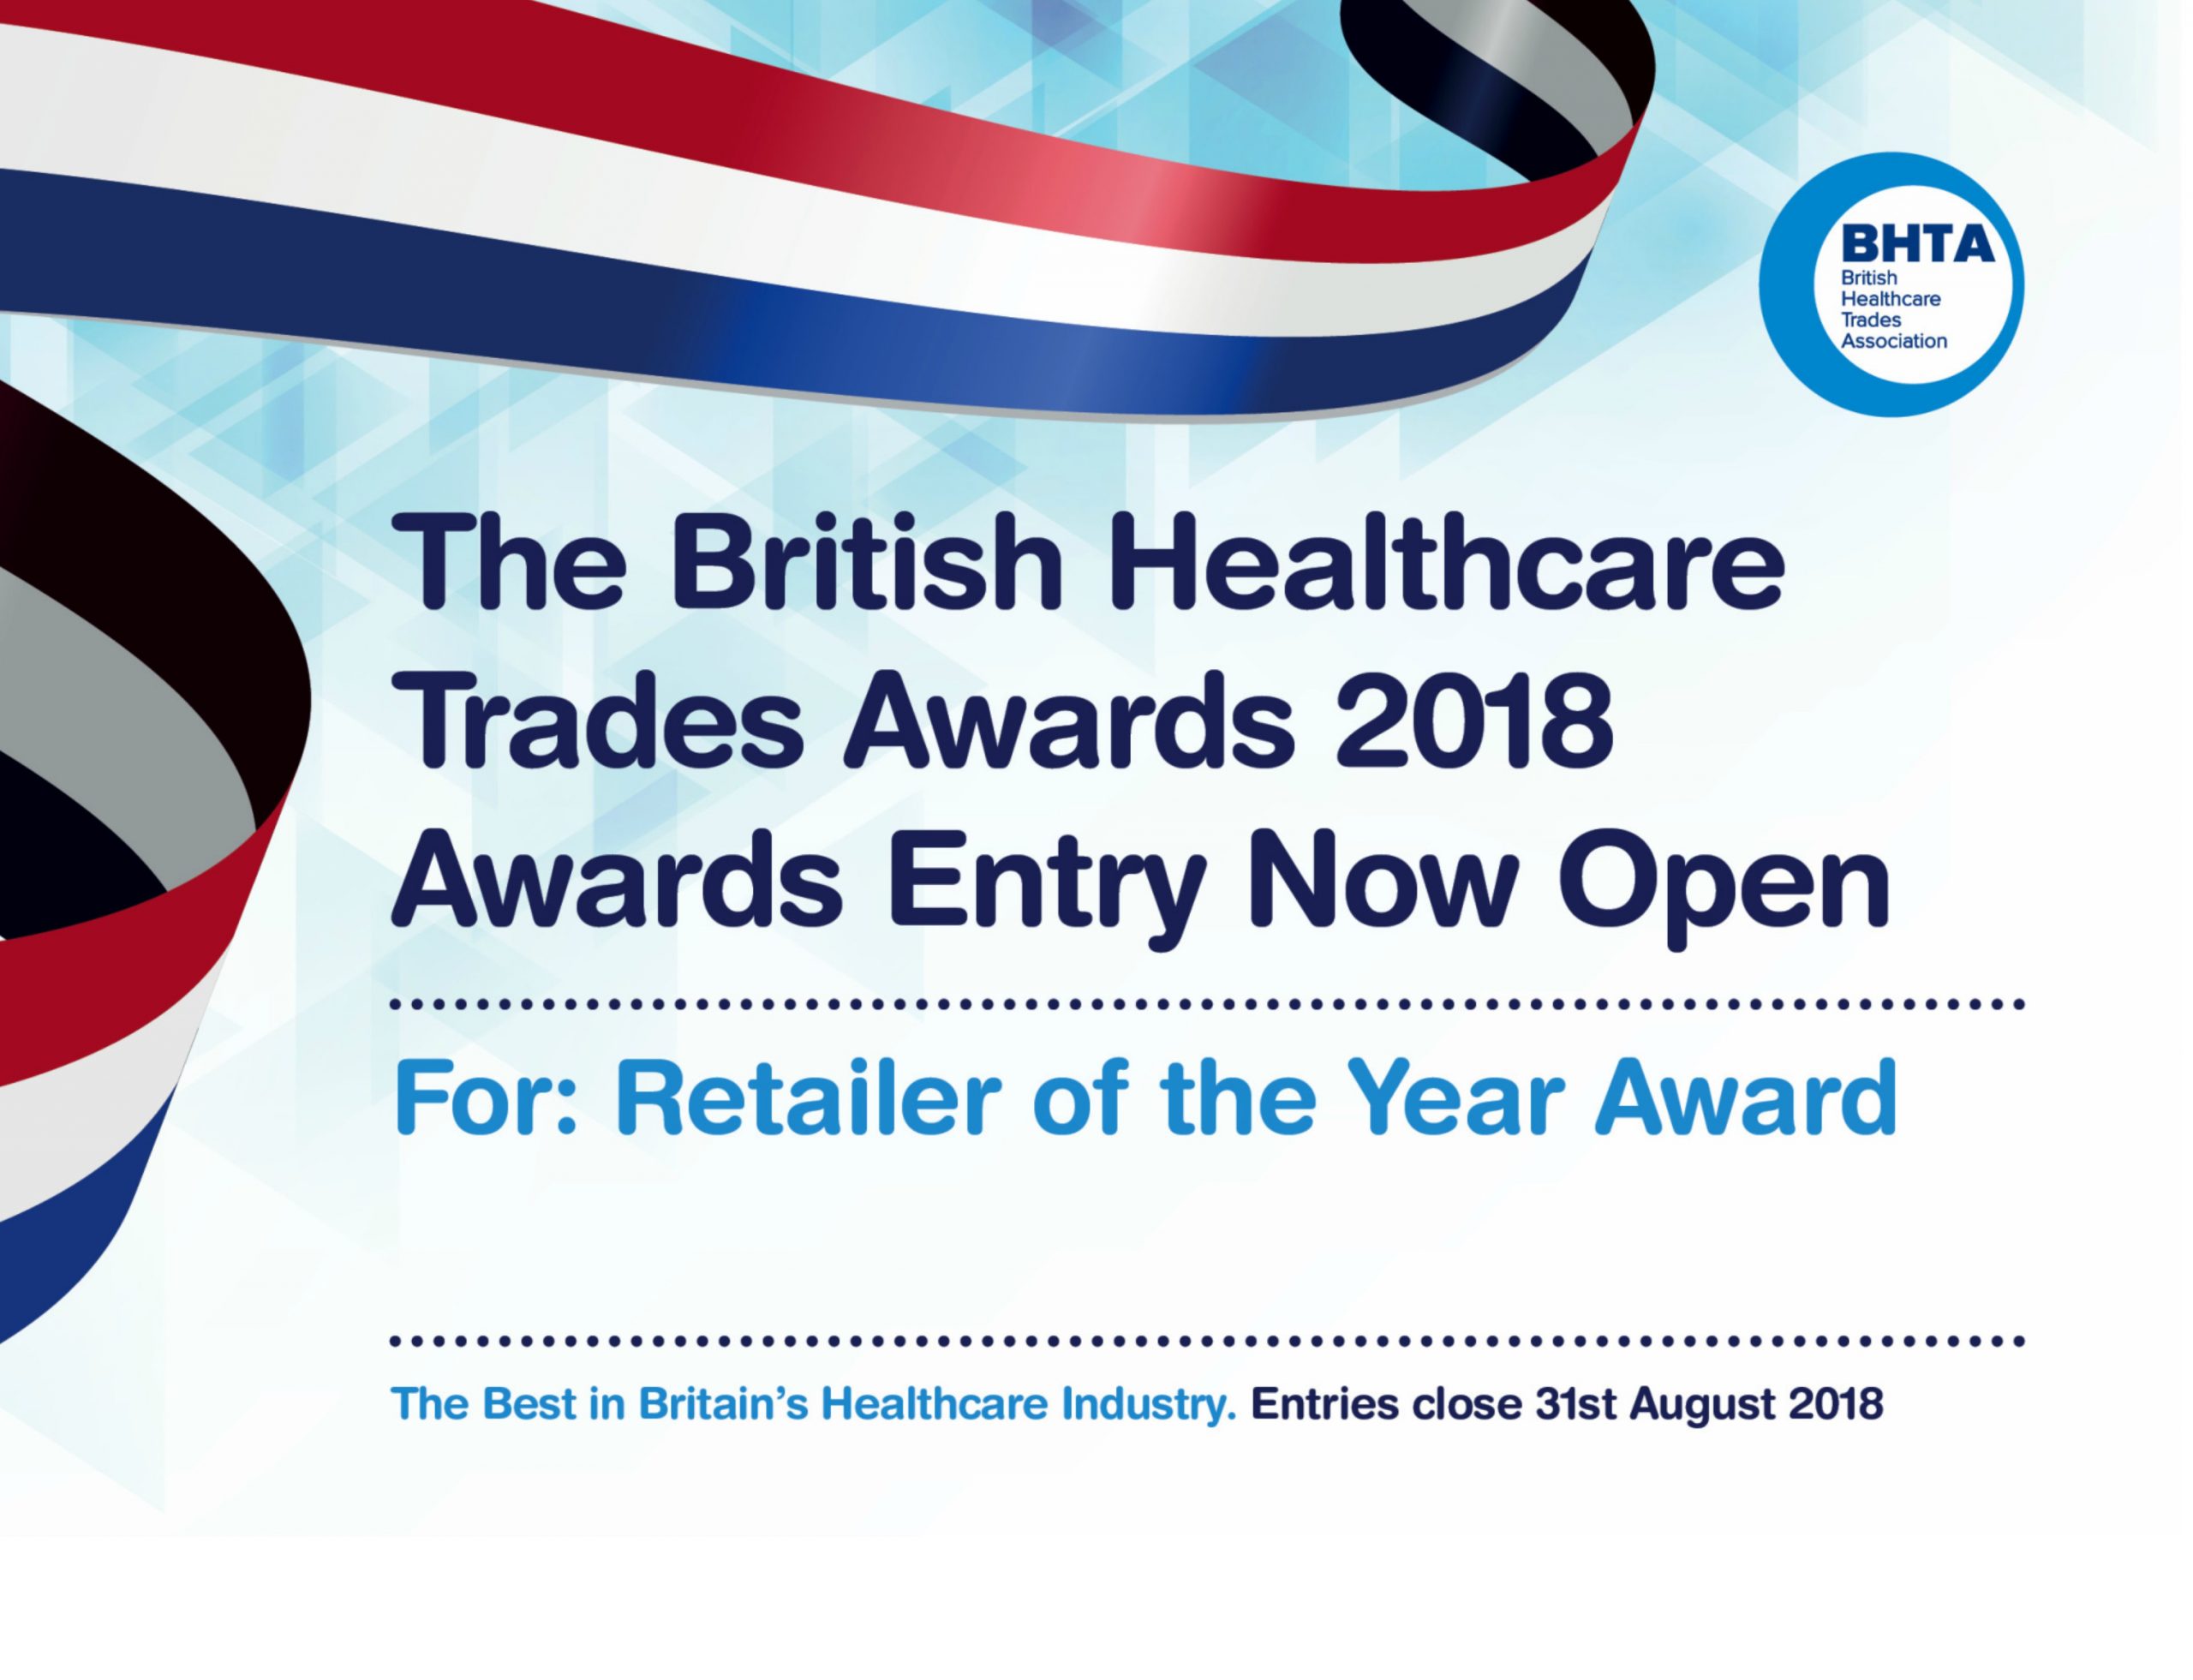 BHTA Retailer of the Year - Calling Healthcare Professionals to Nominate